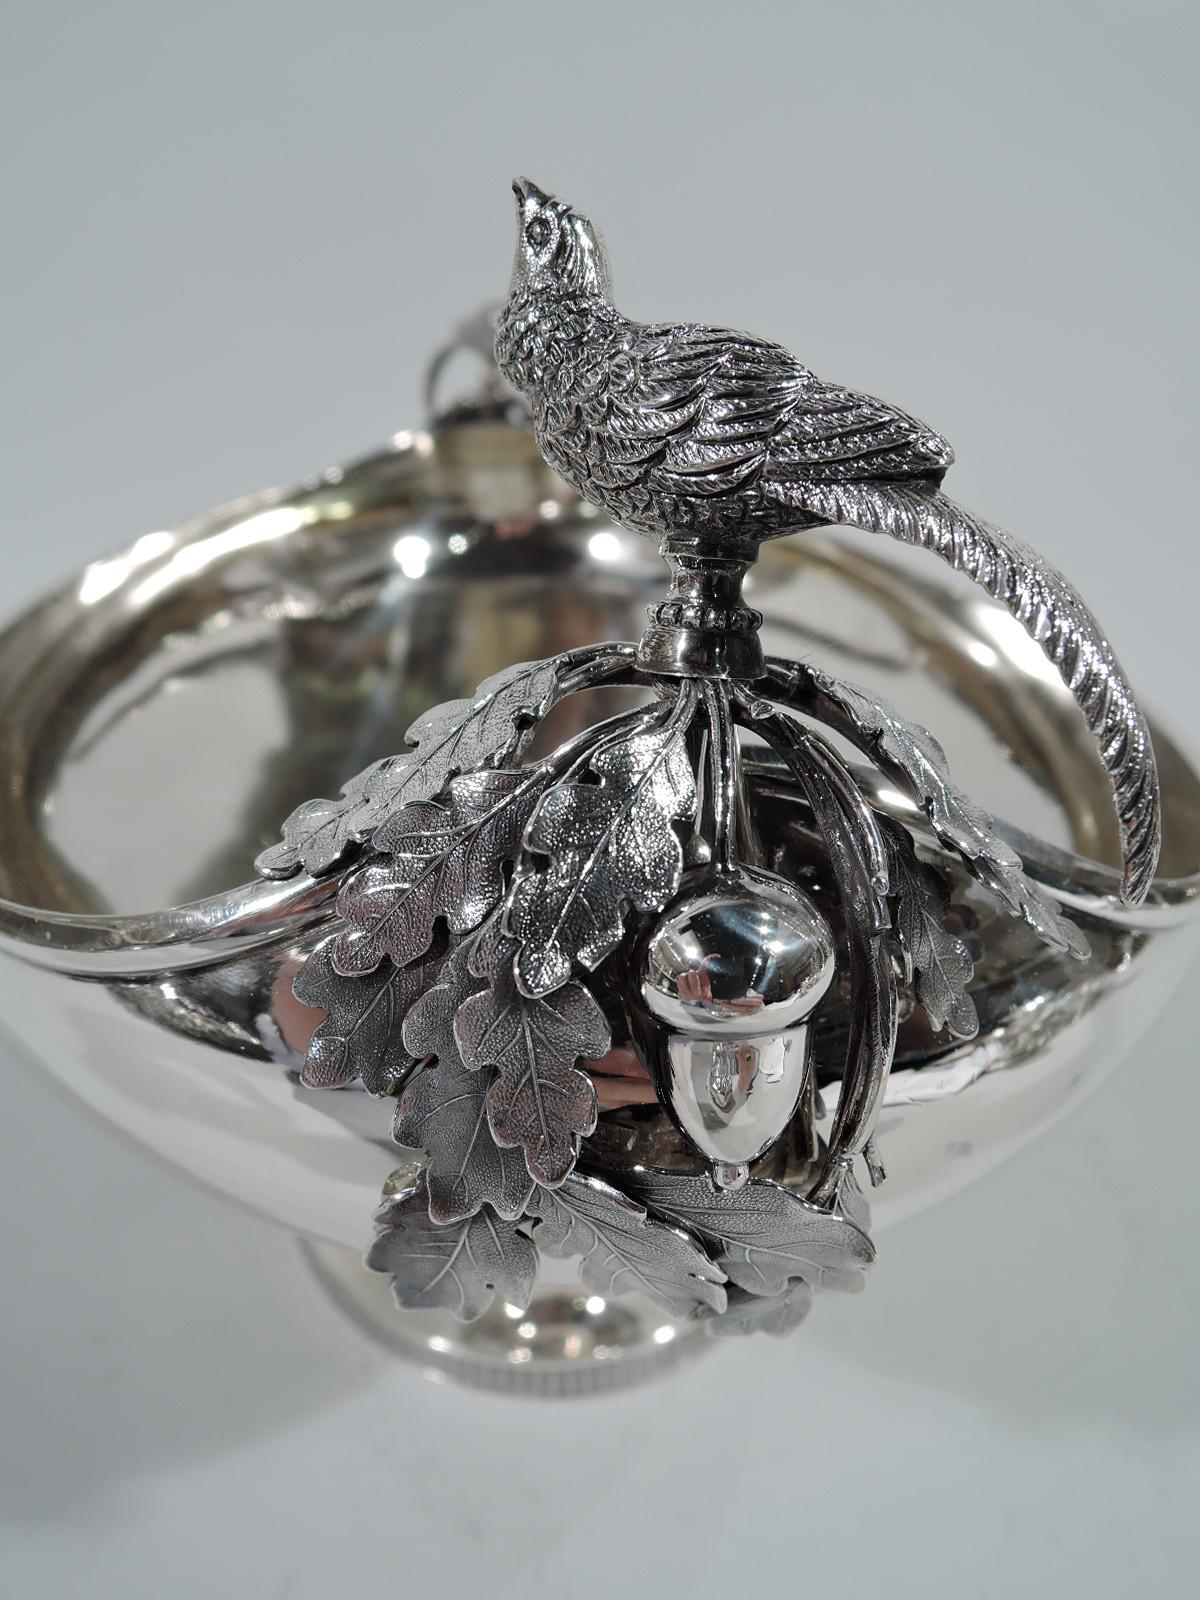 Aesthetic sterling silver centrepiece bowl. Oval with curved sides, short stem, and oval foot. On each end are applied oak leaves and acorn as well as perched bird with raised beak and warbling throat. Stylized ornament. Well centre has engraved